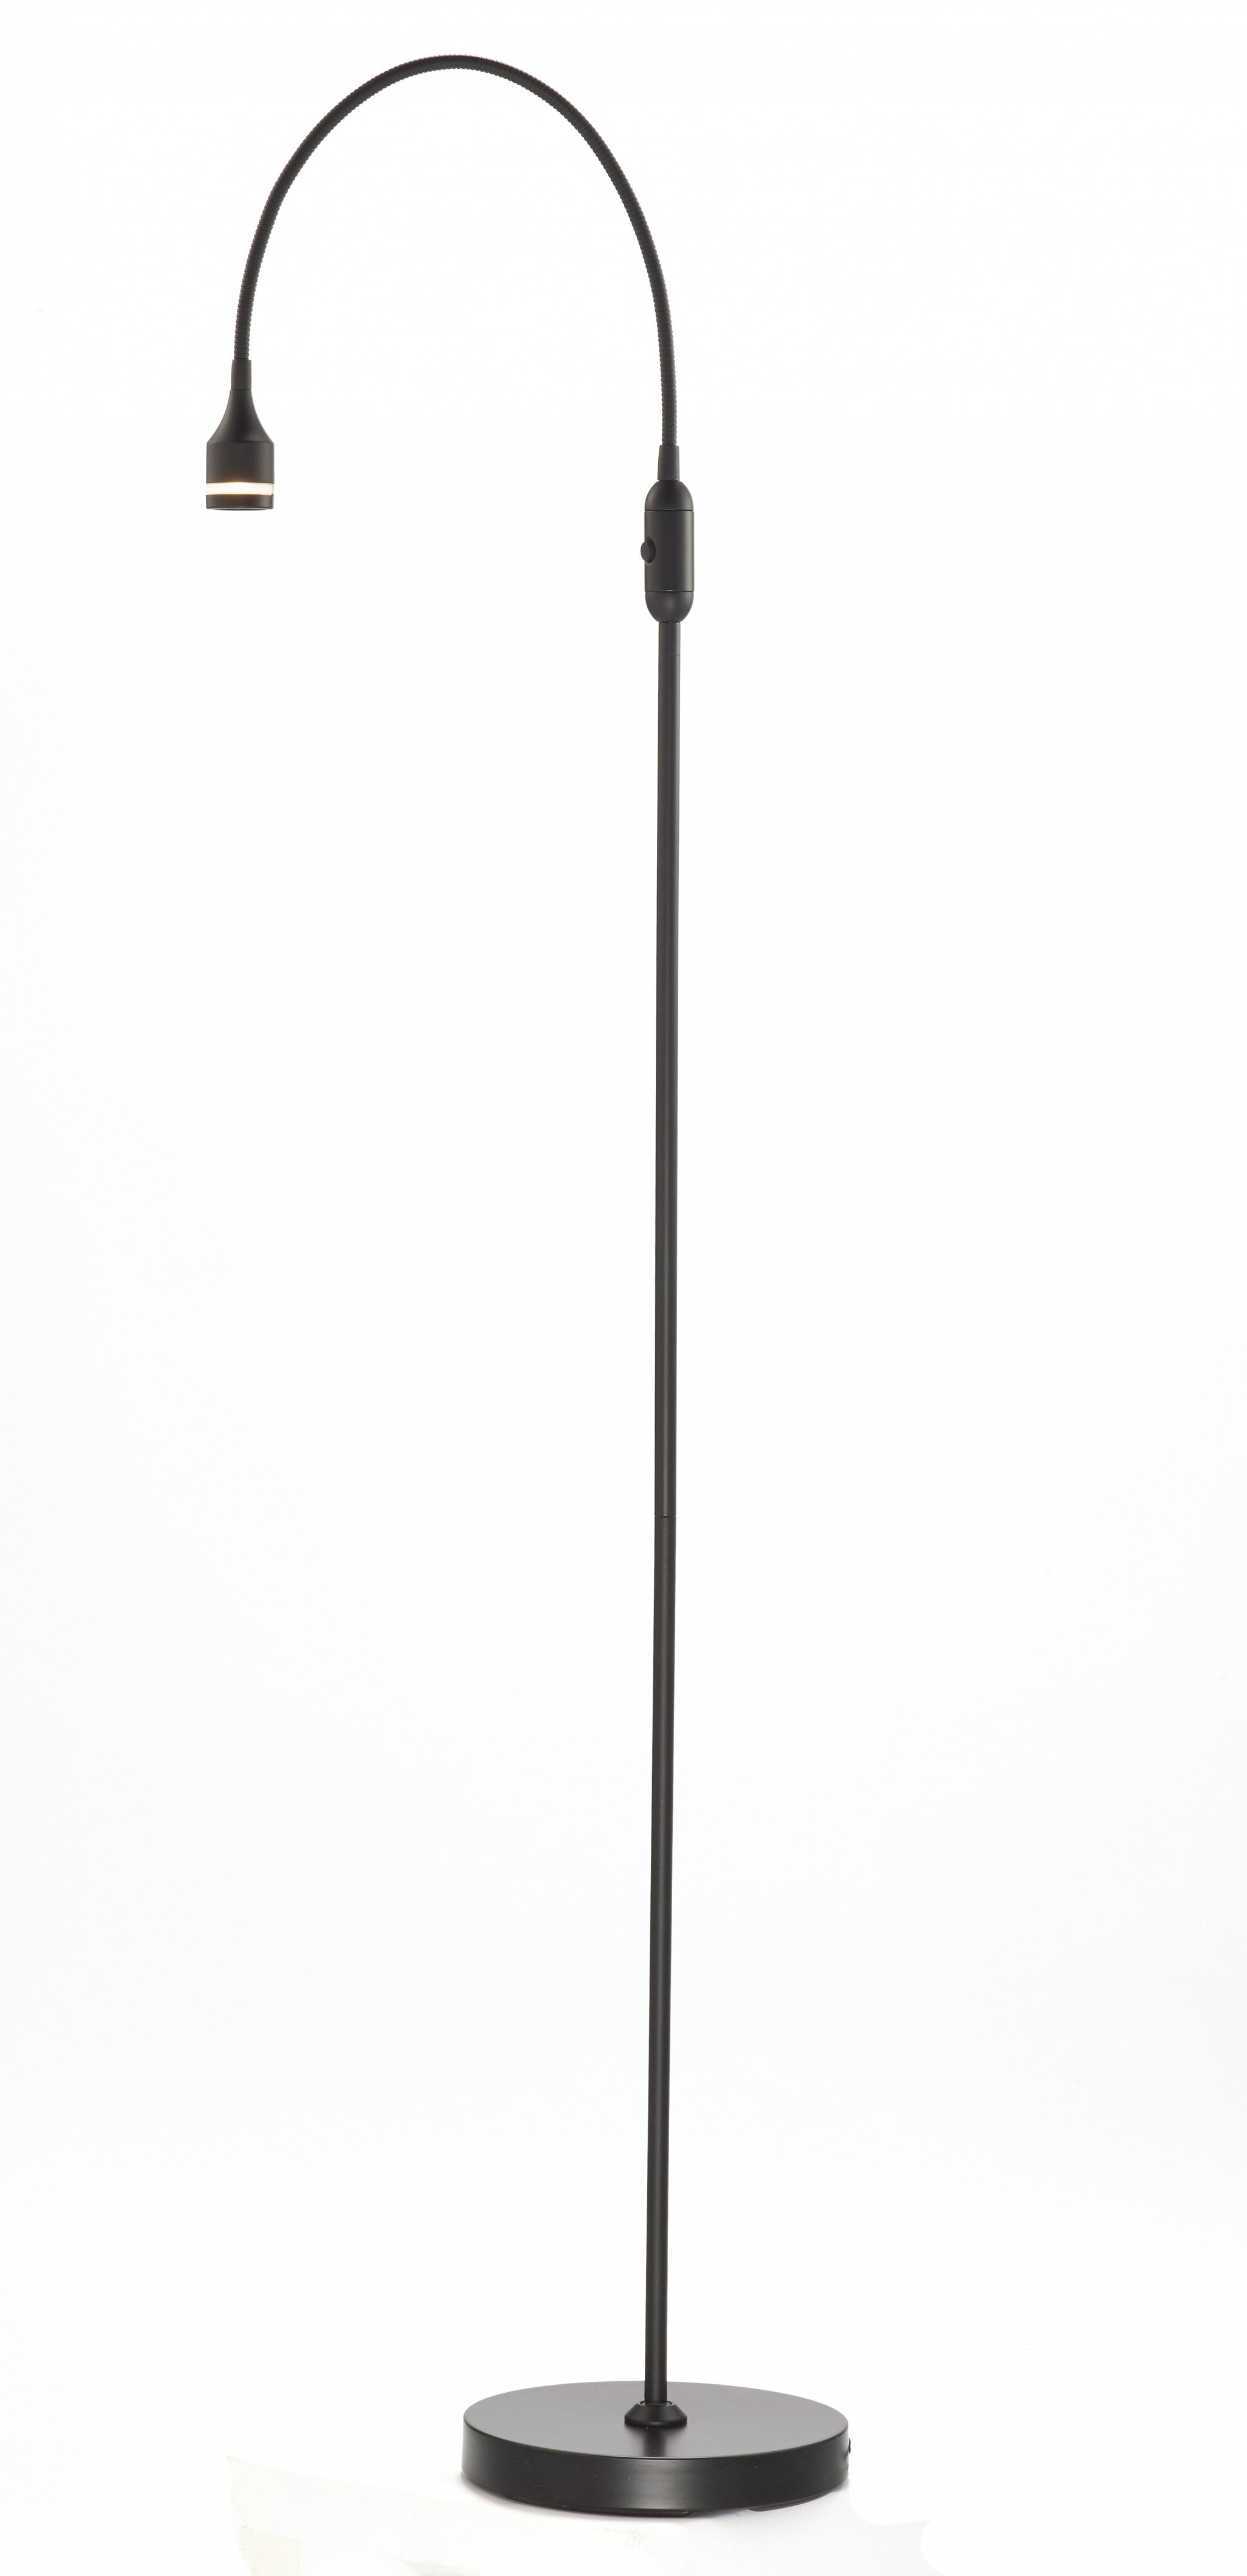 56" Black Arched Floor Lamp